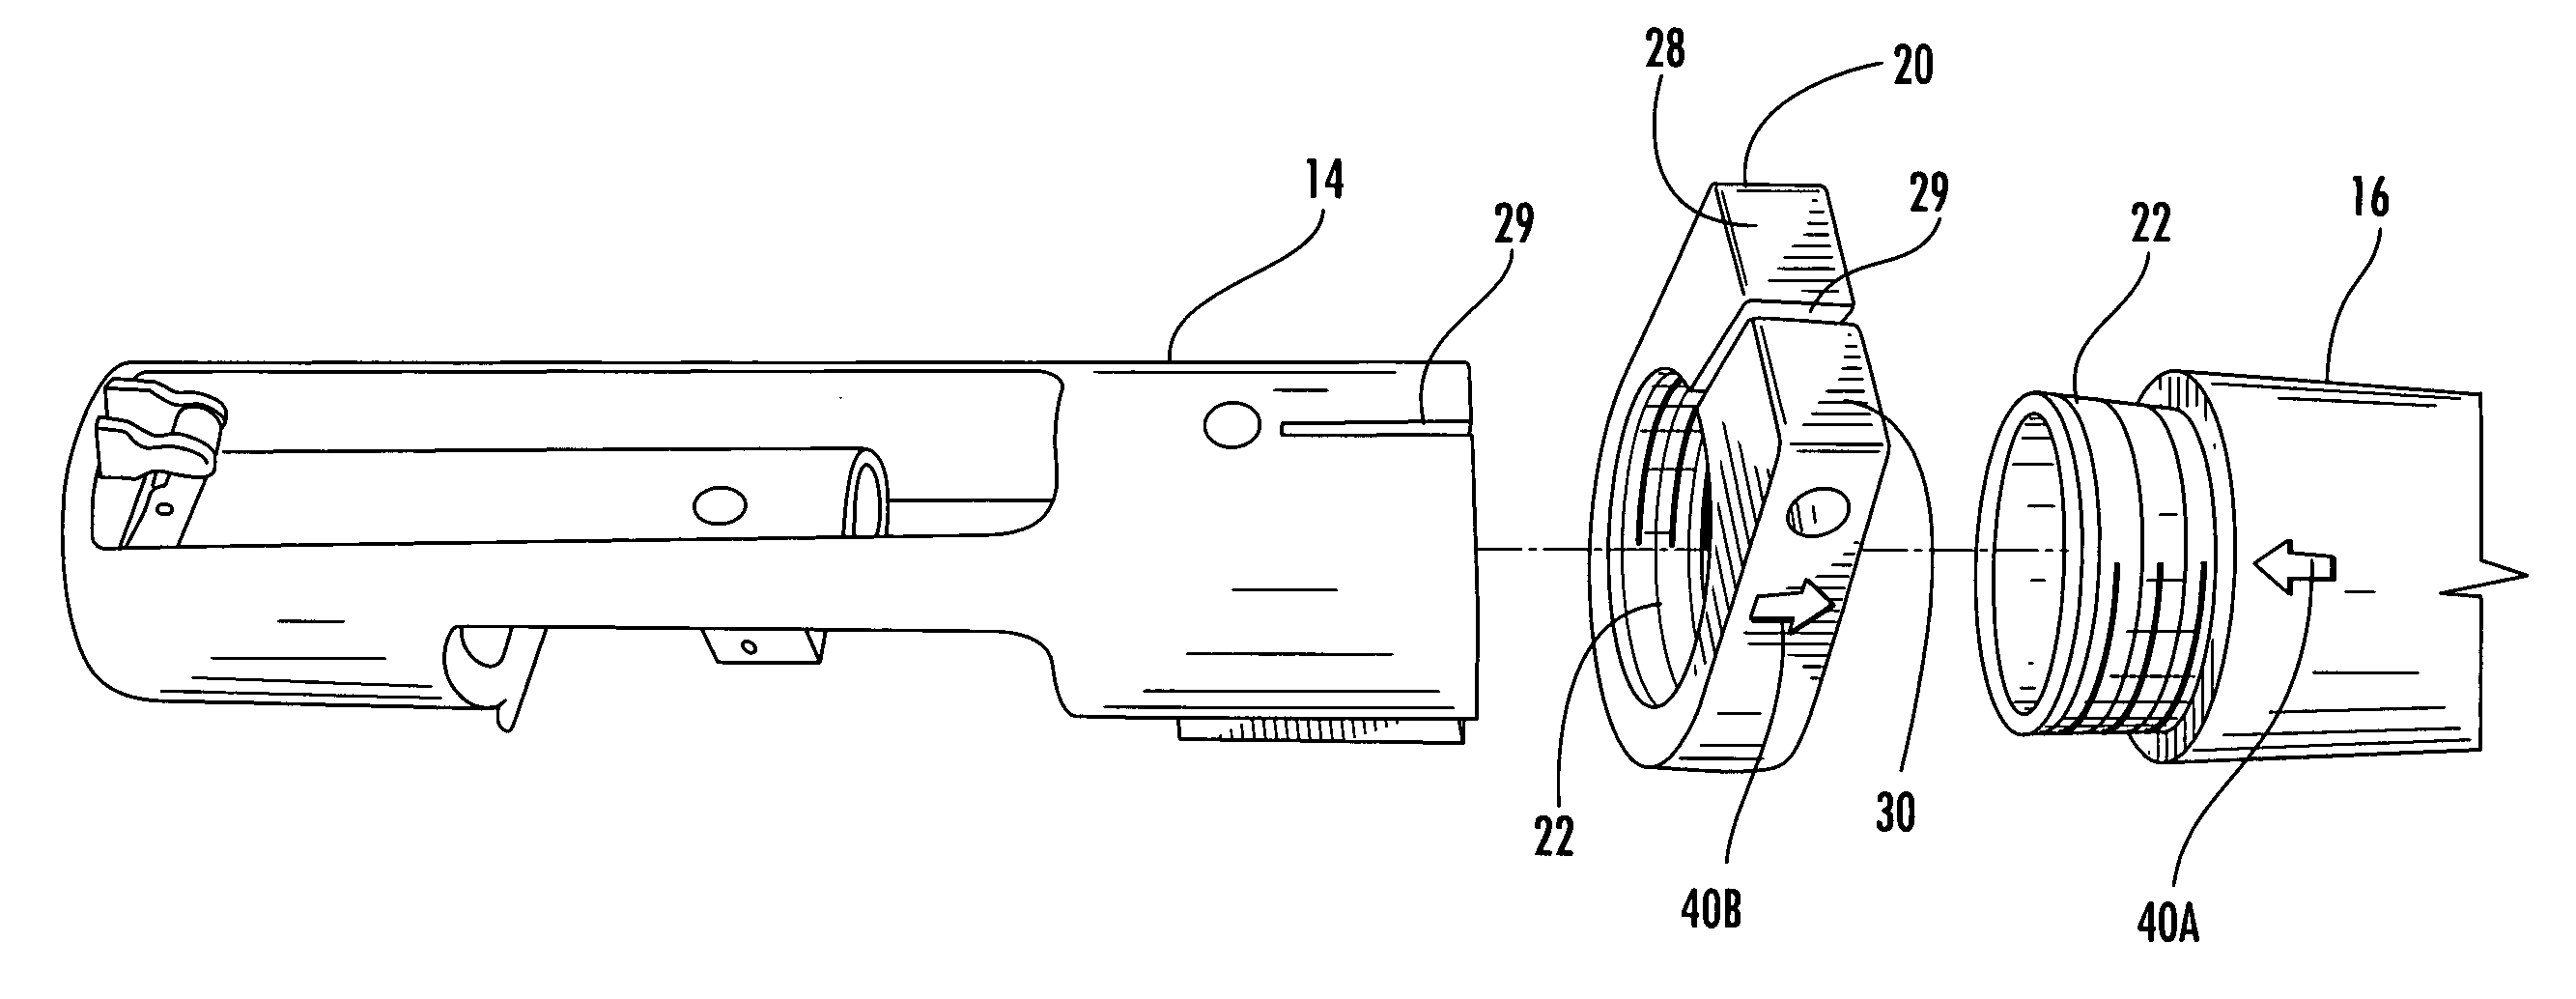 Interchangeable barrel system for rifles